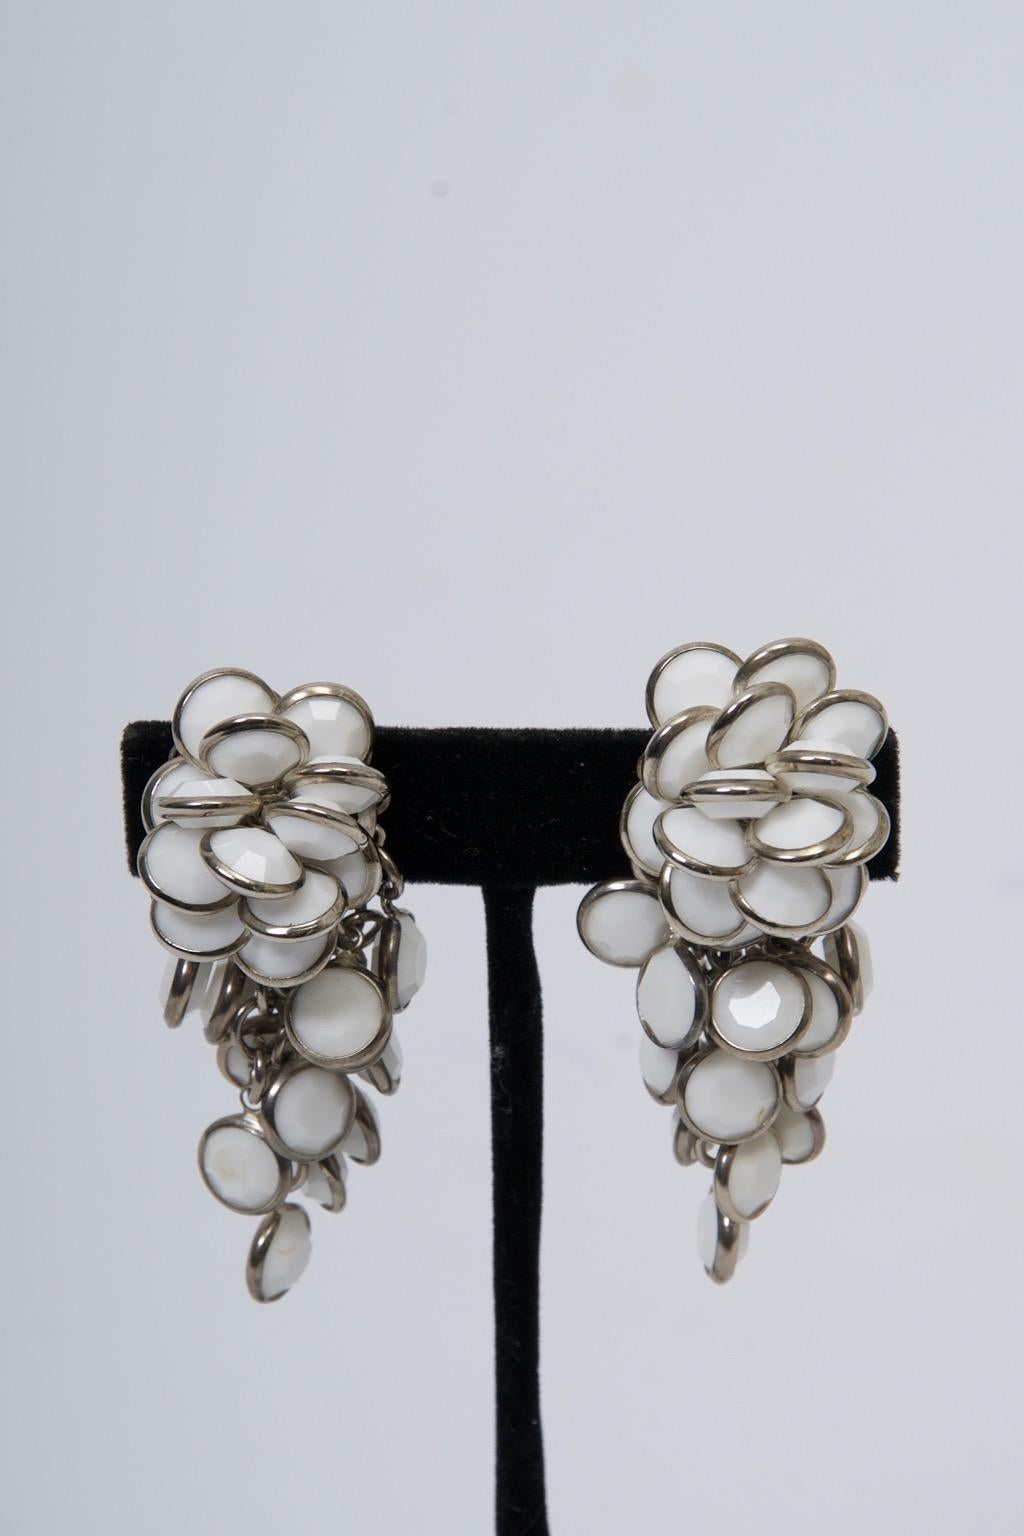 Chandelier earrings of faceted white disks encircled by silver metal cascading down from the earclip. Sorrelli (sisters) was founded in 1983 and is a female owned and operated jewelry business known for their handcrafted jewelry.